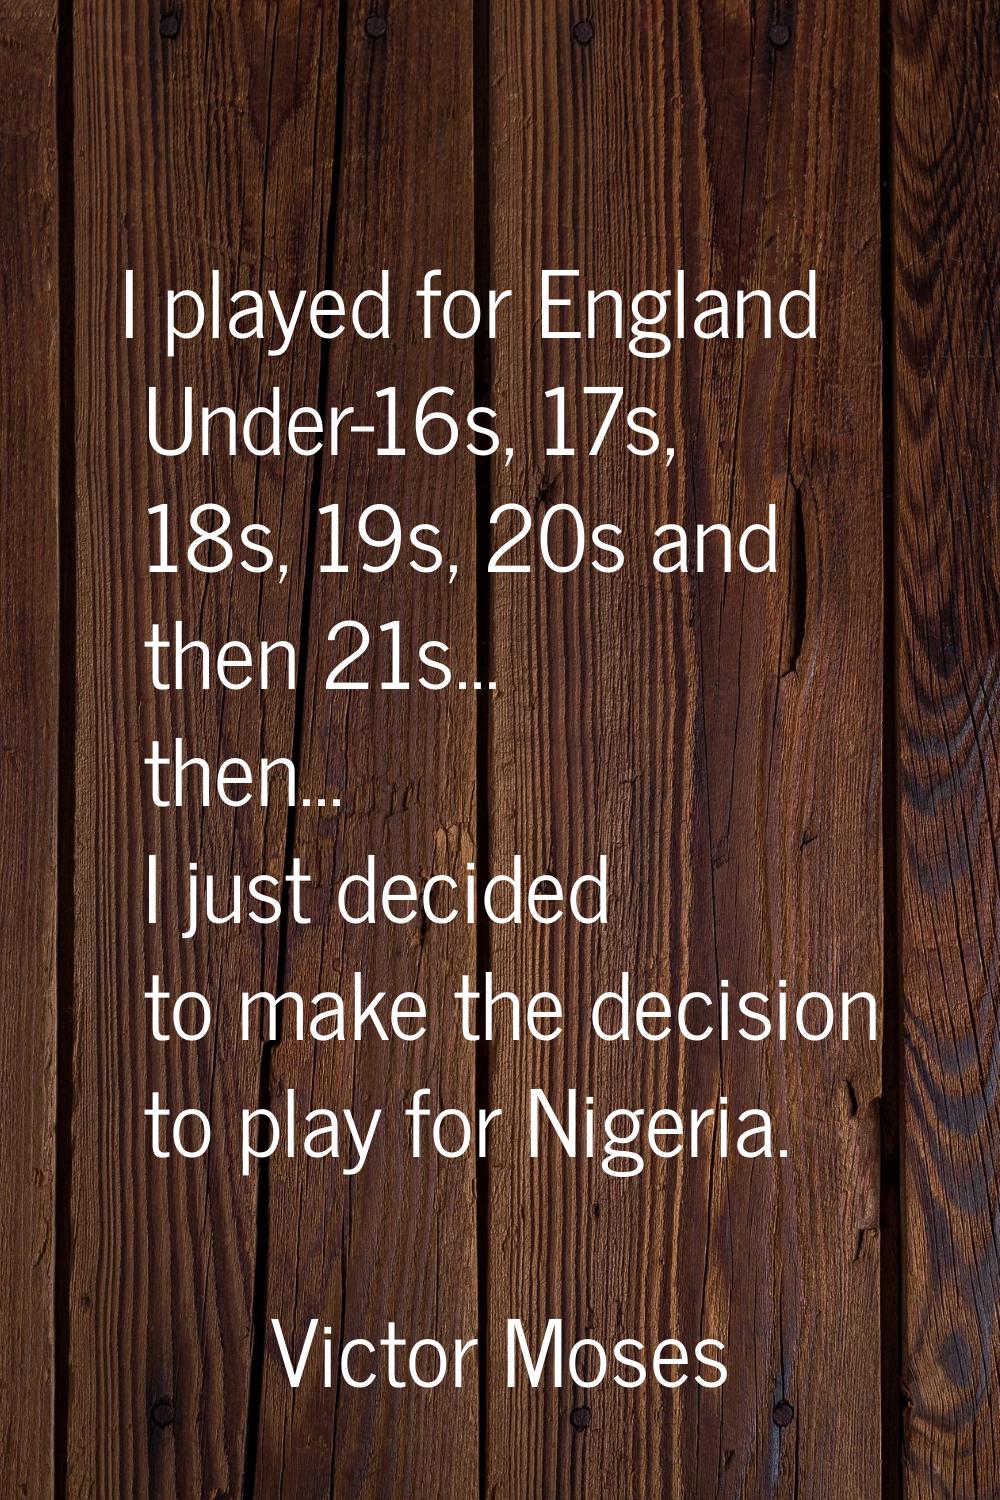 I played for England Under-16s, 17s, 18s, 19s, 20s and then 21s... then... I just decided to make t